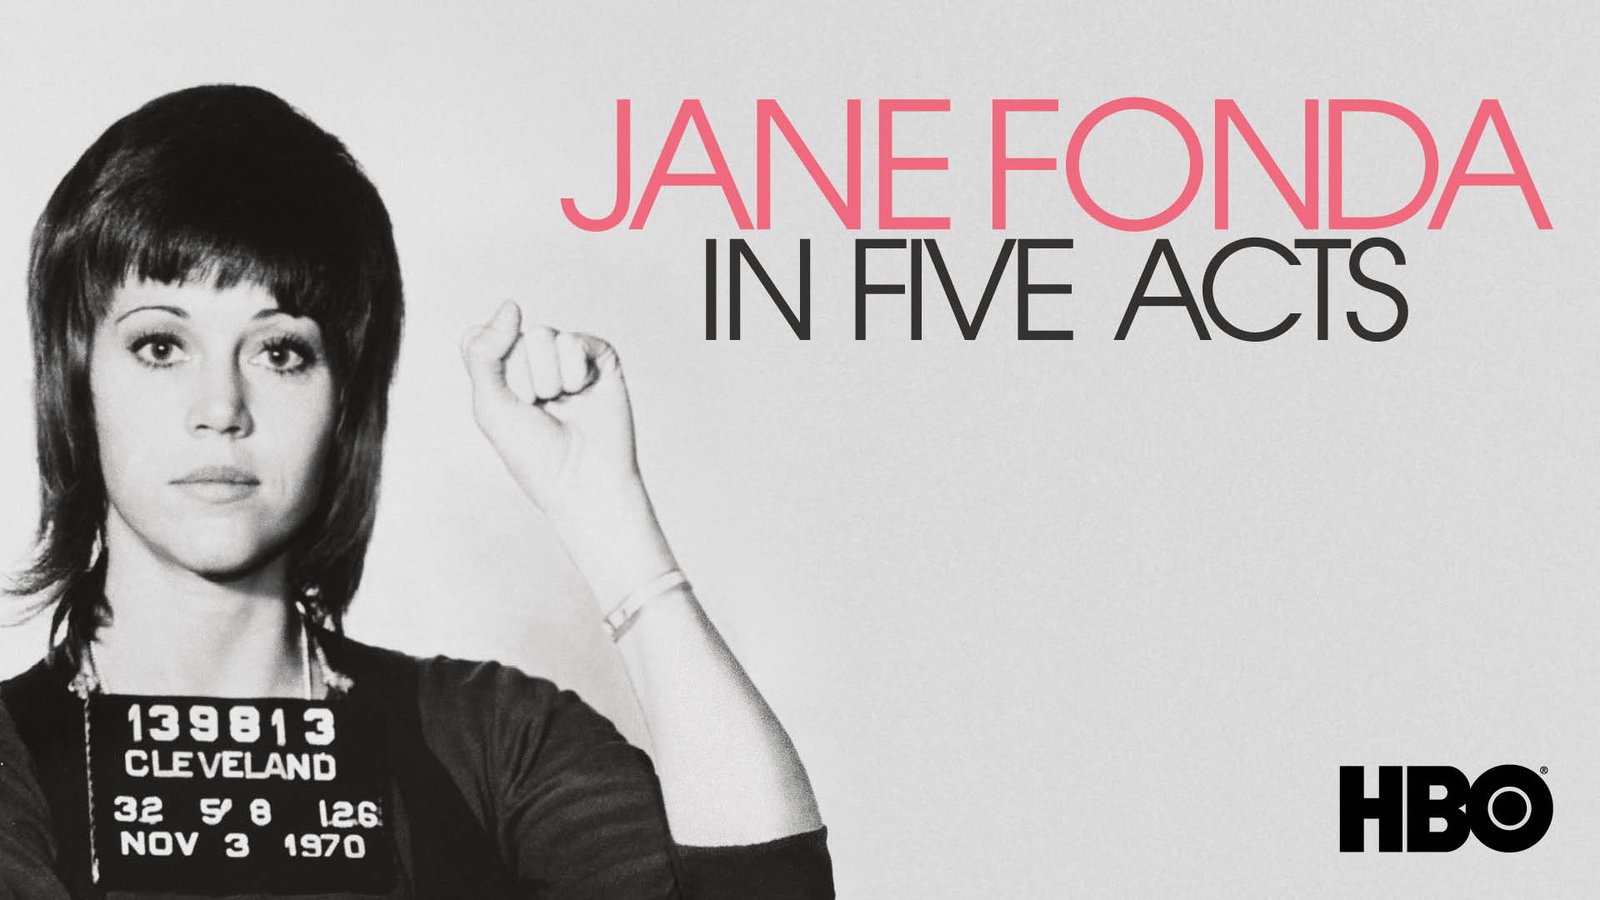 Jane Fonda in Five Acts - The Life of an Actress/Activist/Cultural Icon